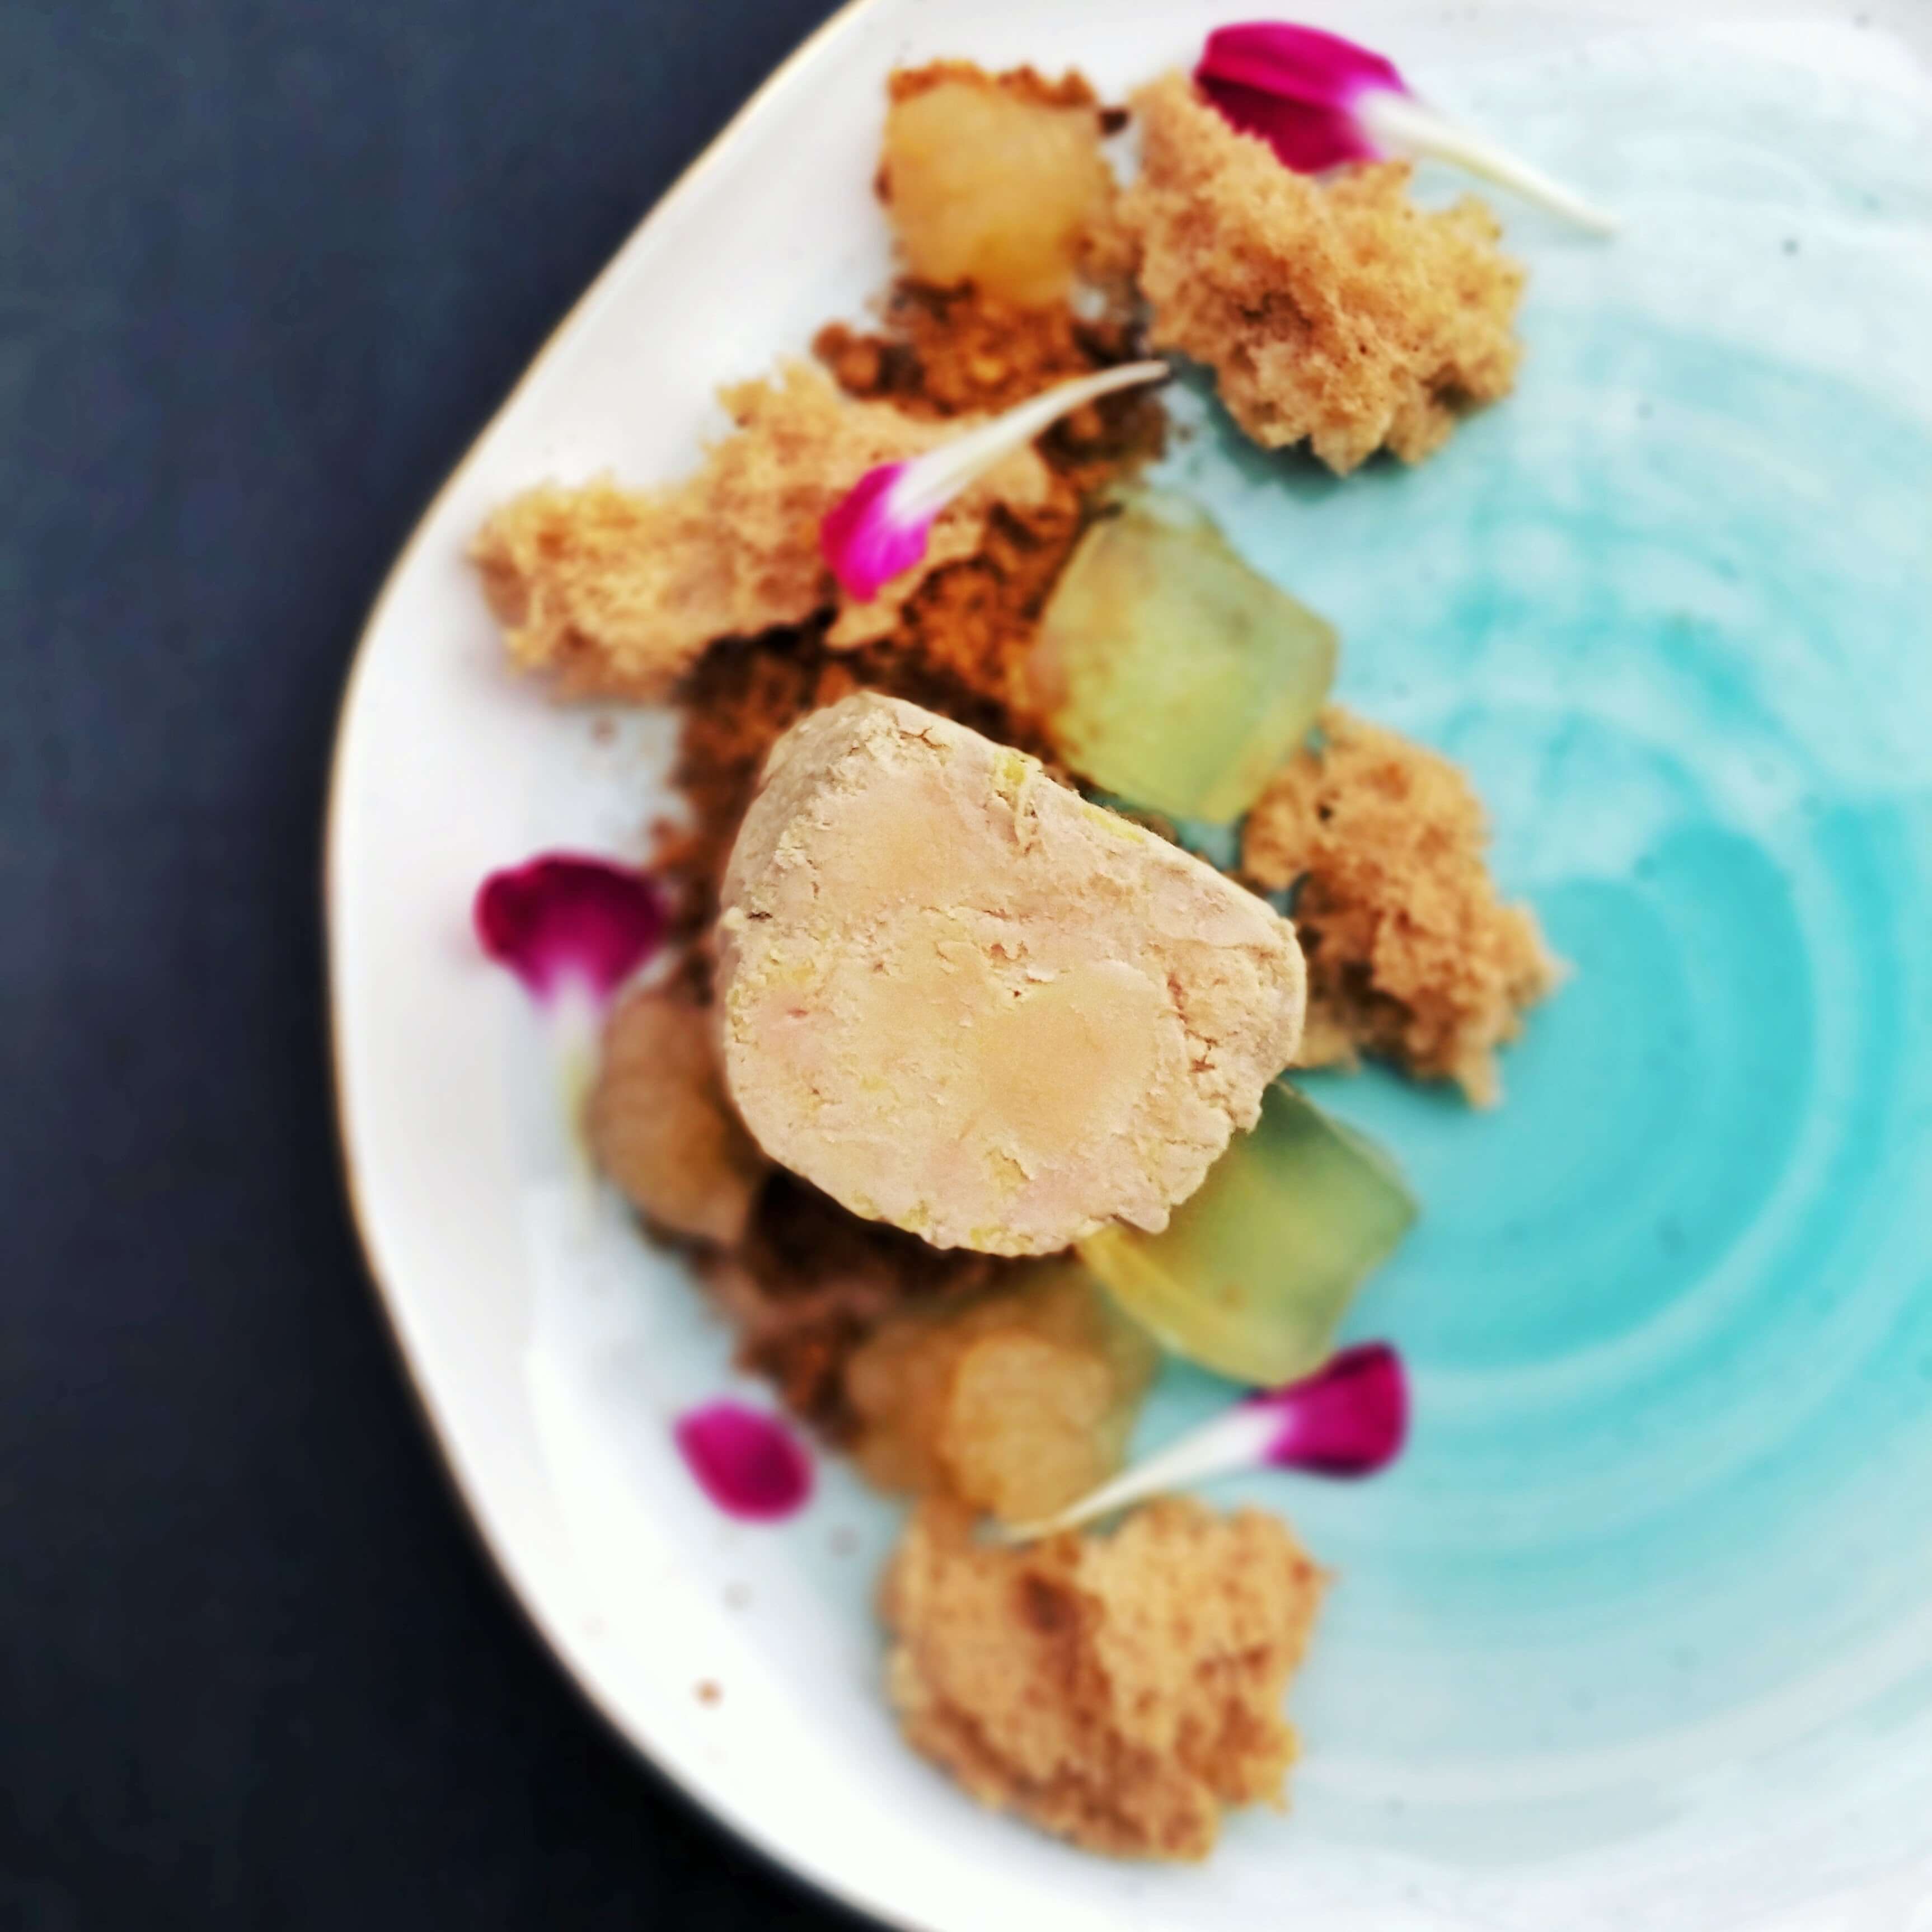 Fabulous Foie Gras with Pear, Gingerbread, Hazelnut and Sauternes | Berries and Spice